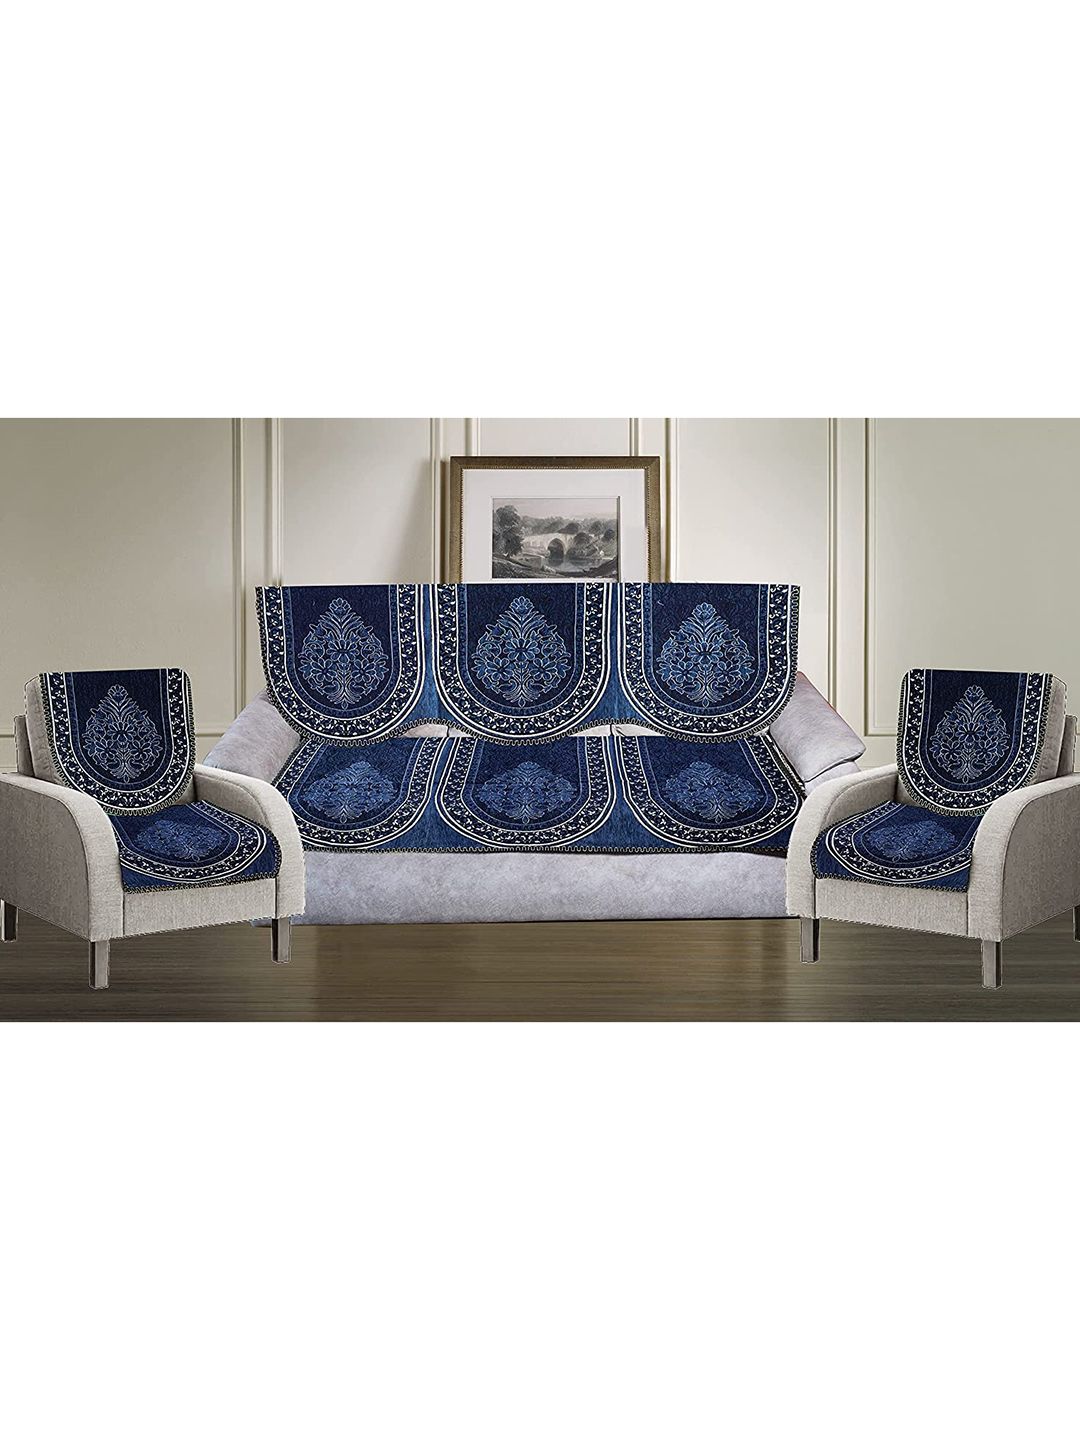 GRIIHAM Set of 5 Blue & White Printed Sofa Covers Price in India